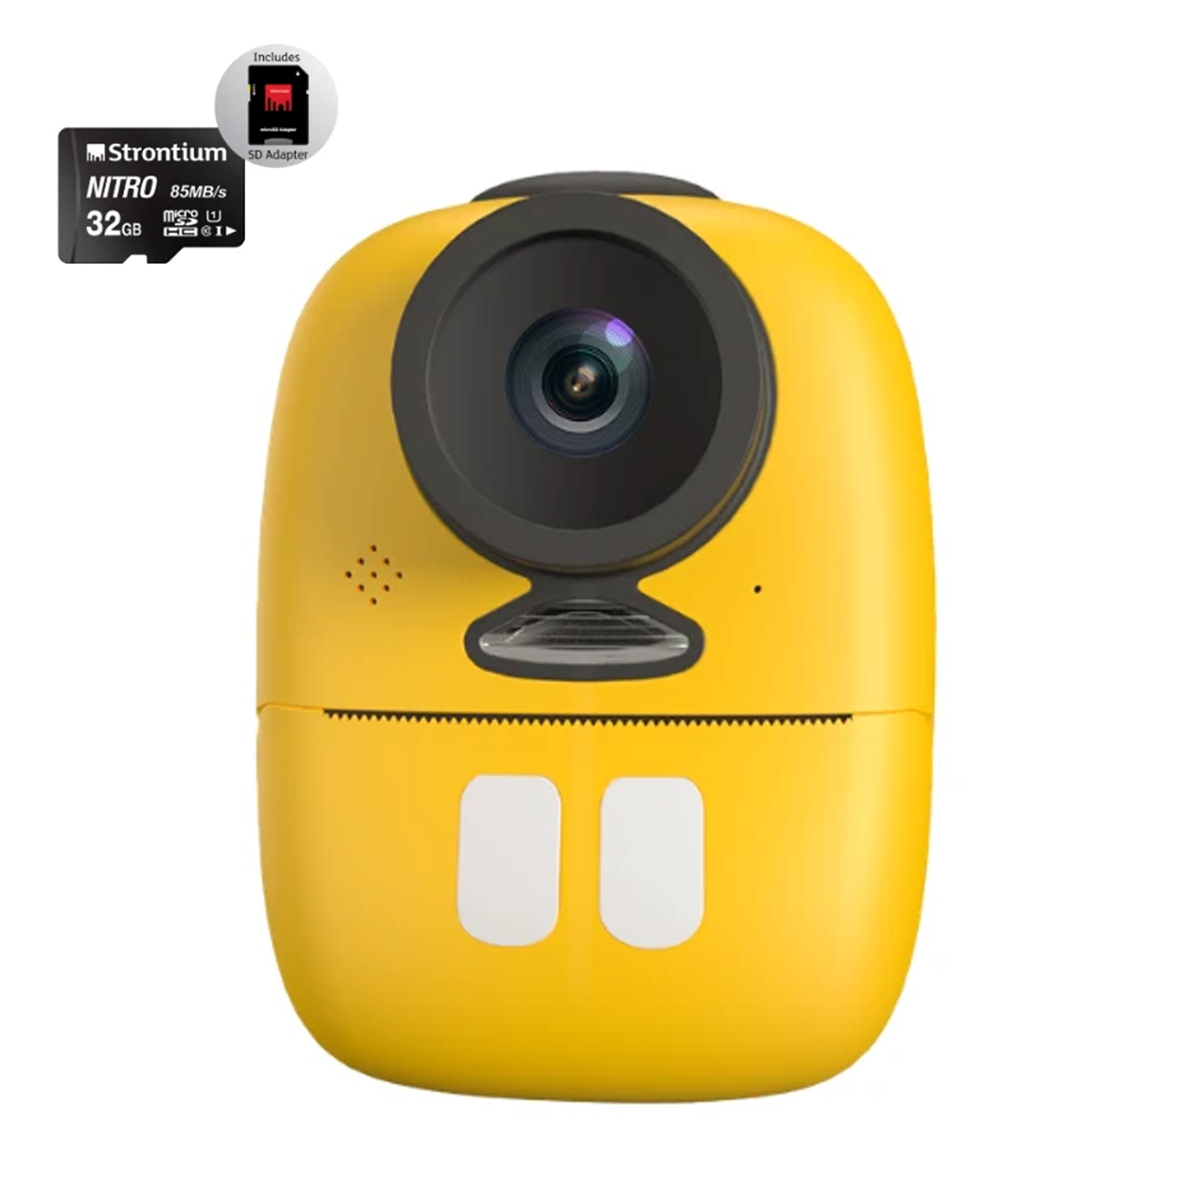 Smart 2-in-1 Instant Print Digital Camera for Kids with Dual Lens - DUDU